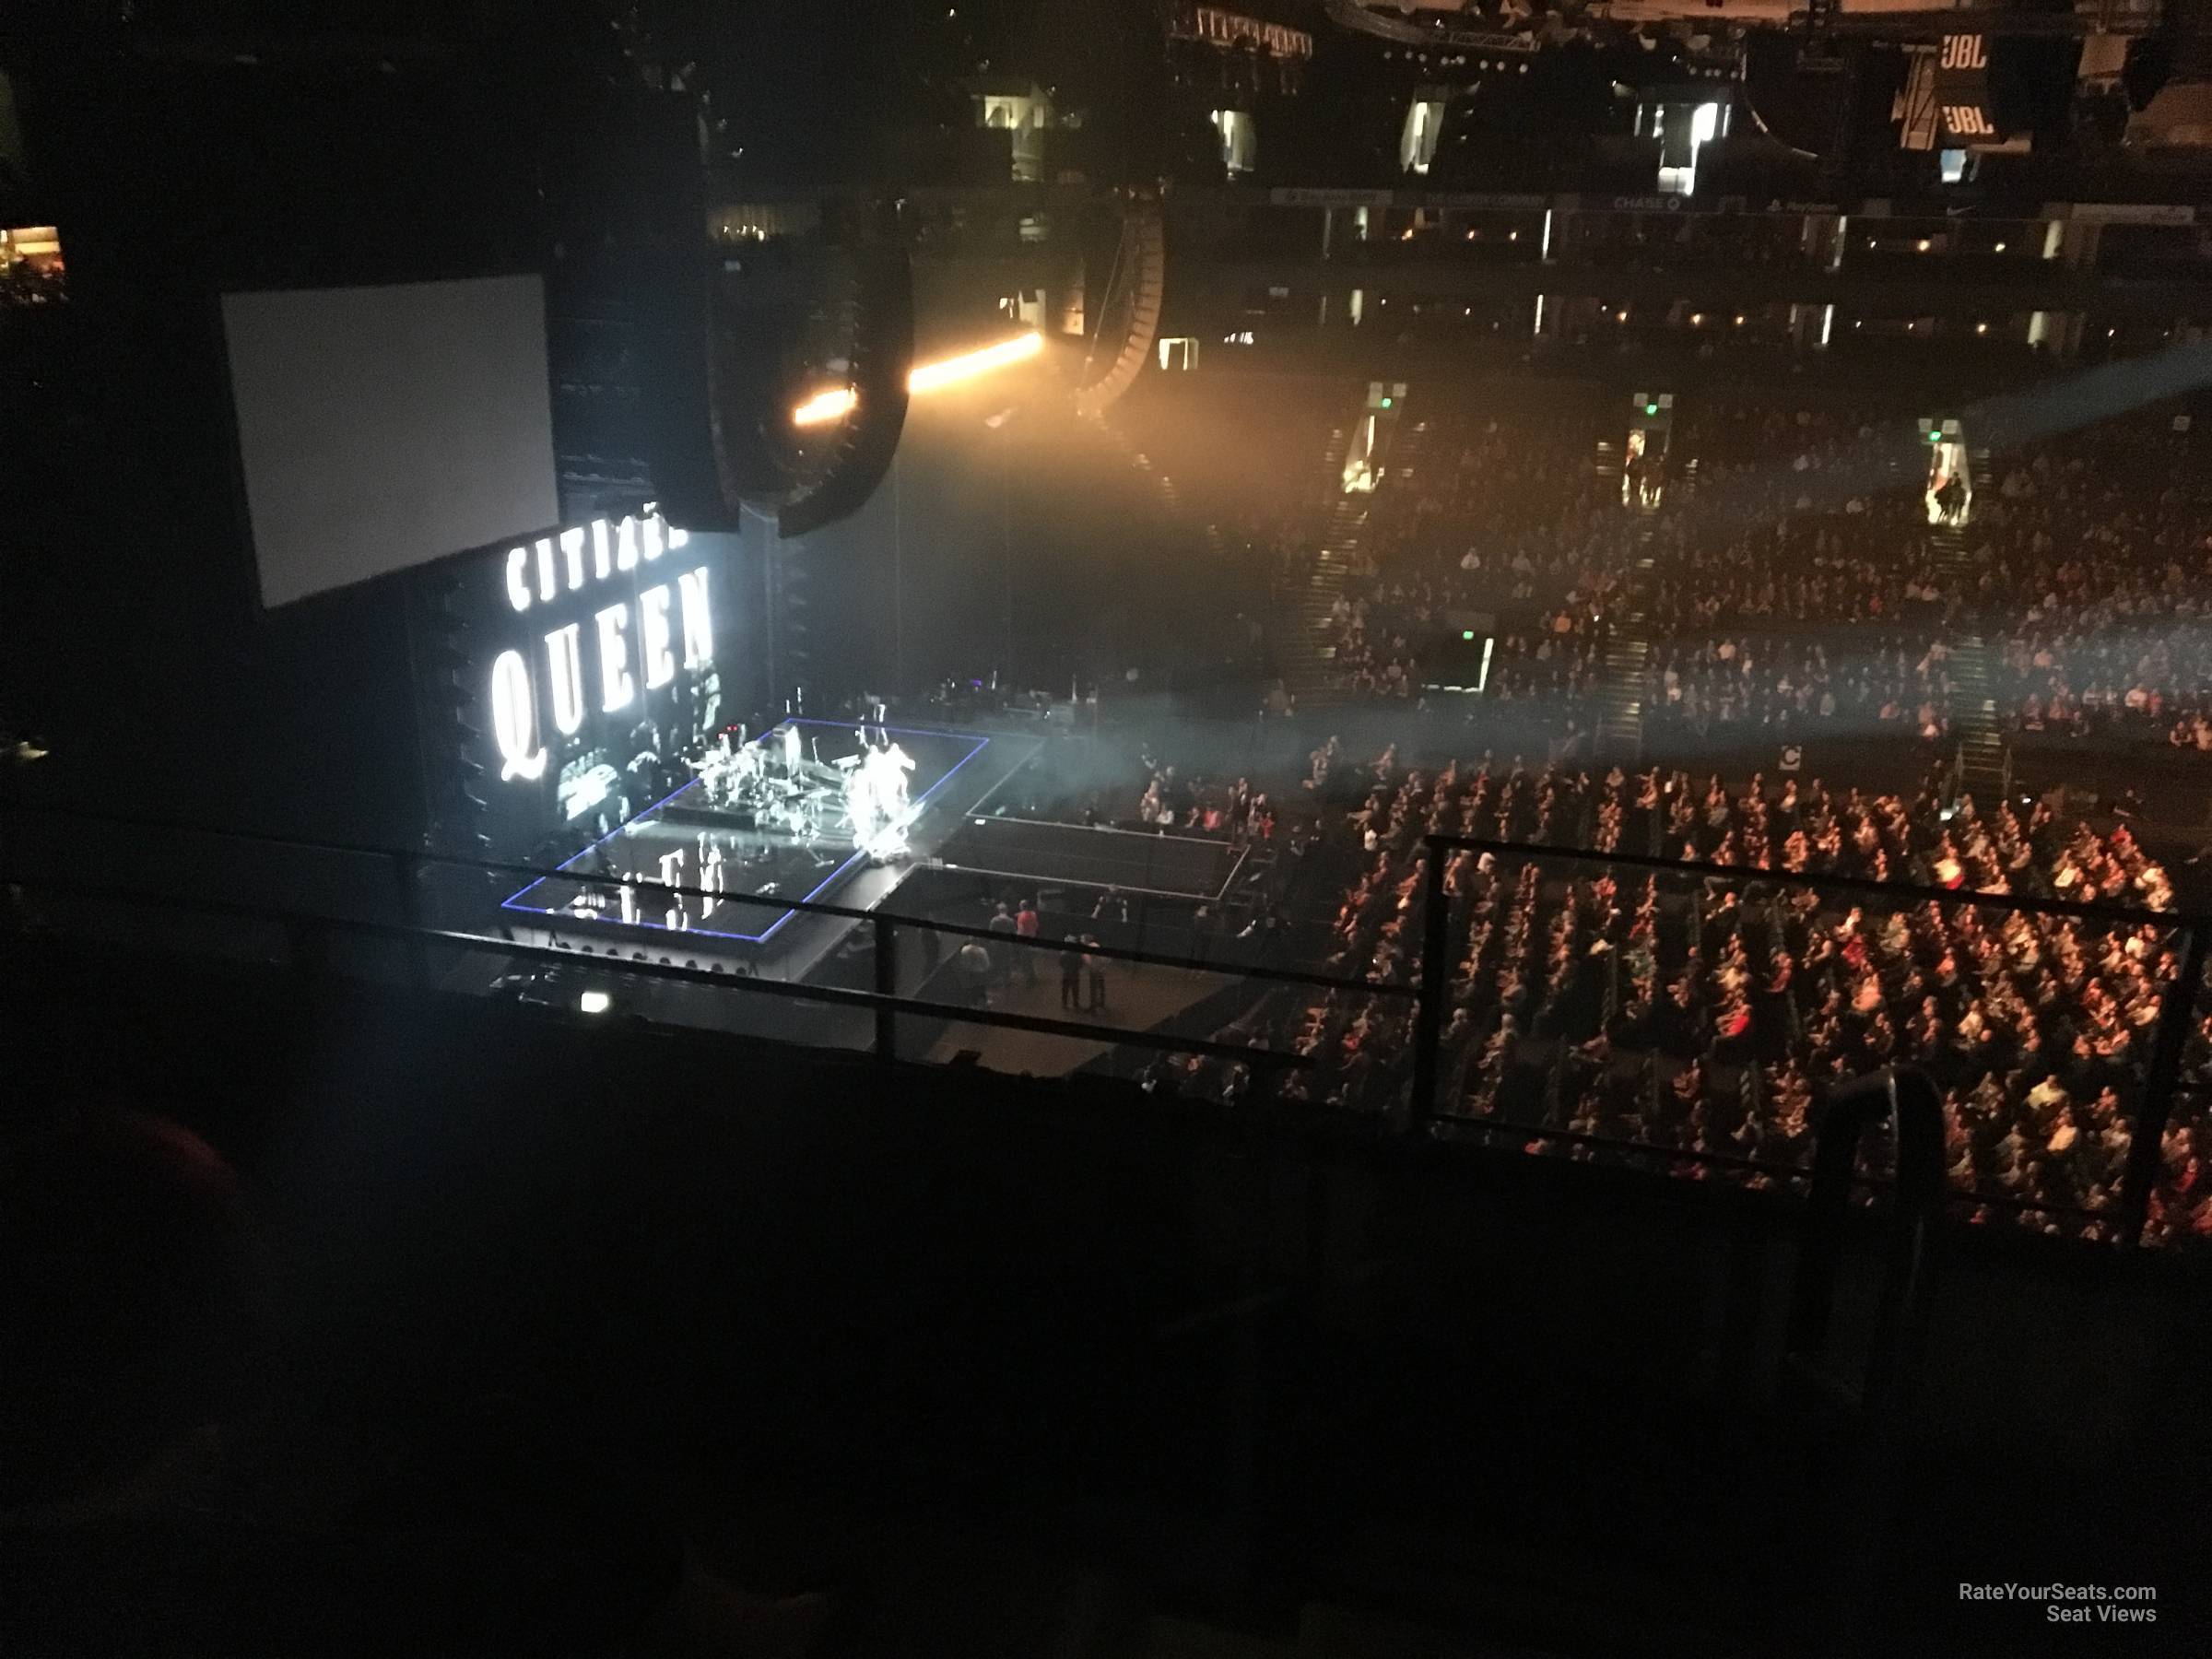 section 218, row 3 seat view  - oakland arena